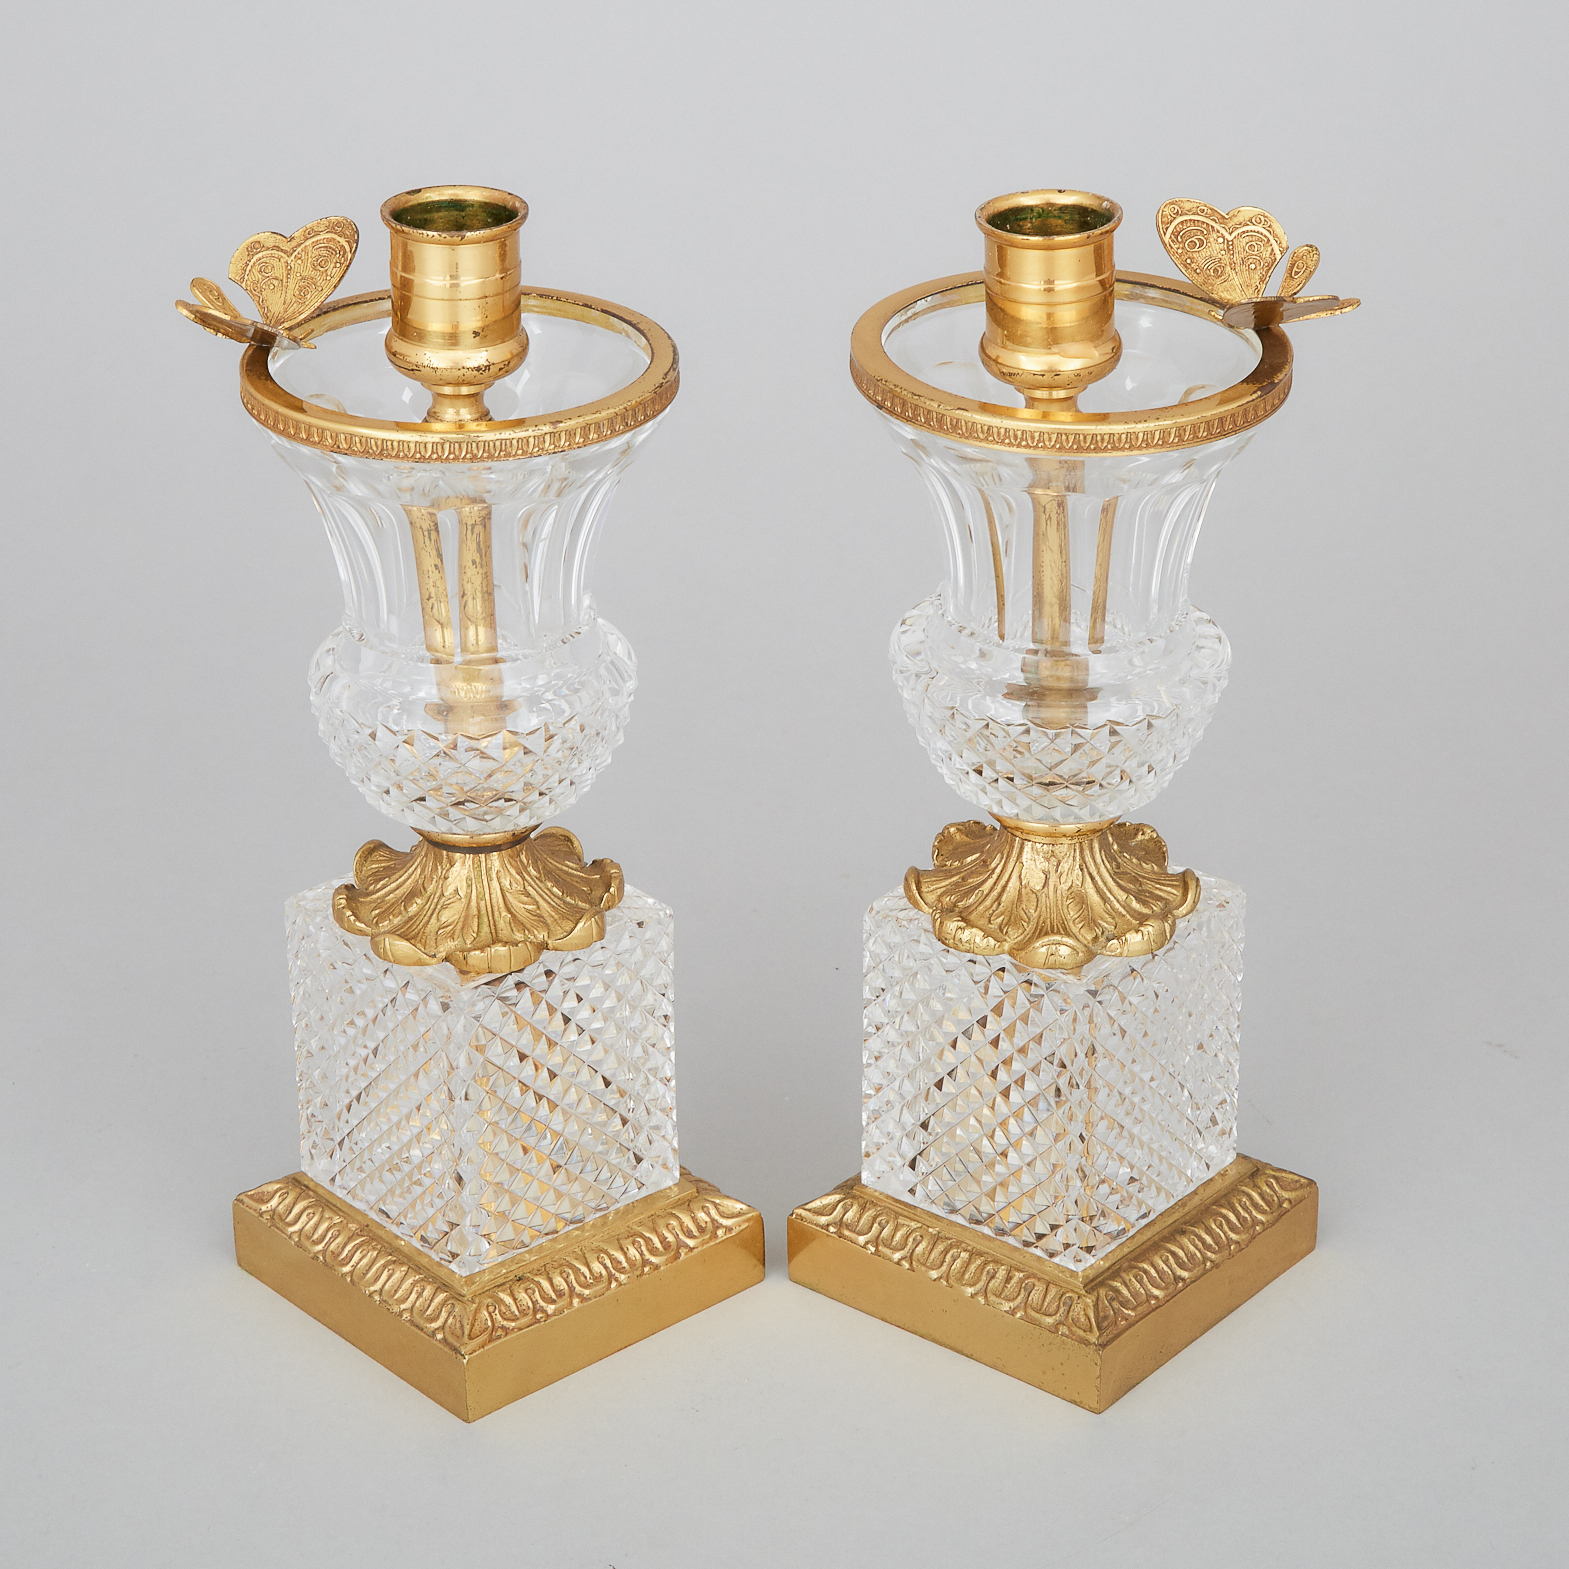 Pair of French Urn Form Ormolu Mounted Cut Glass Candlesticks, mid 20th century